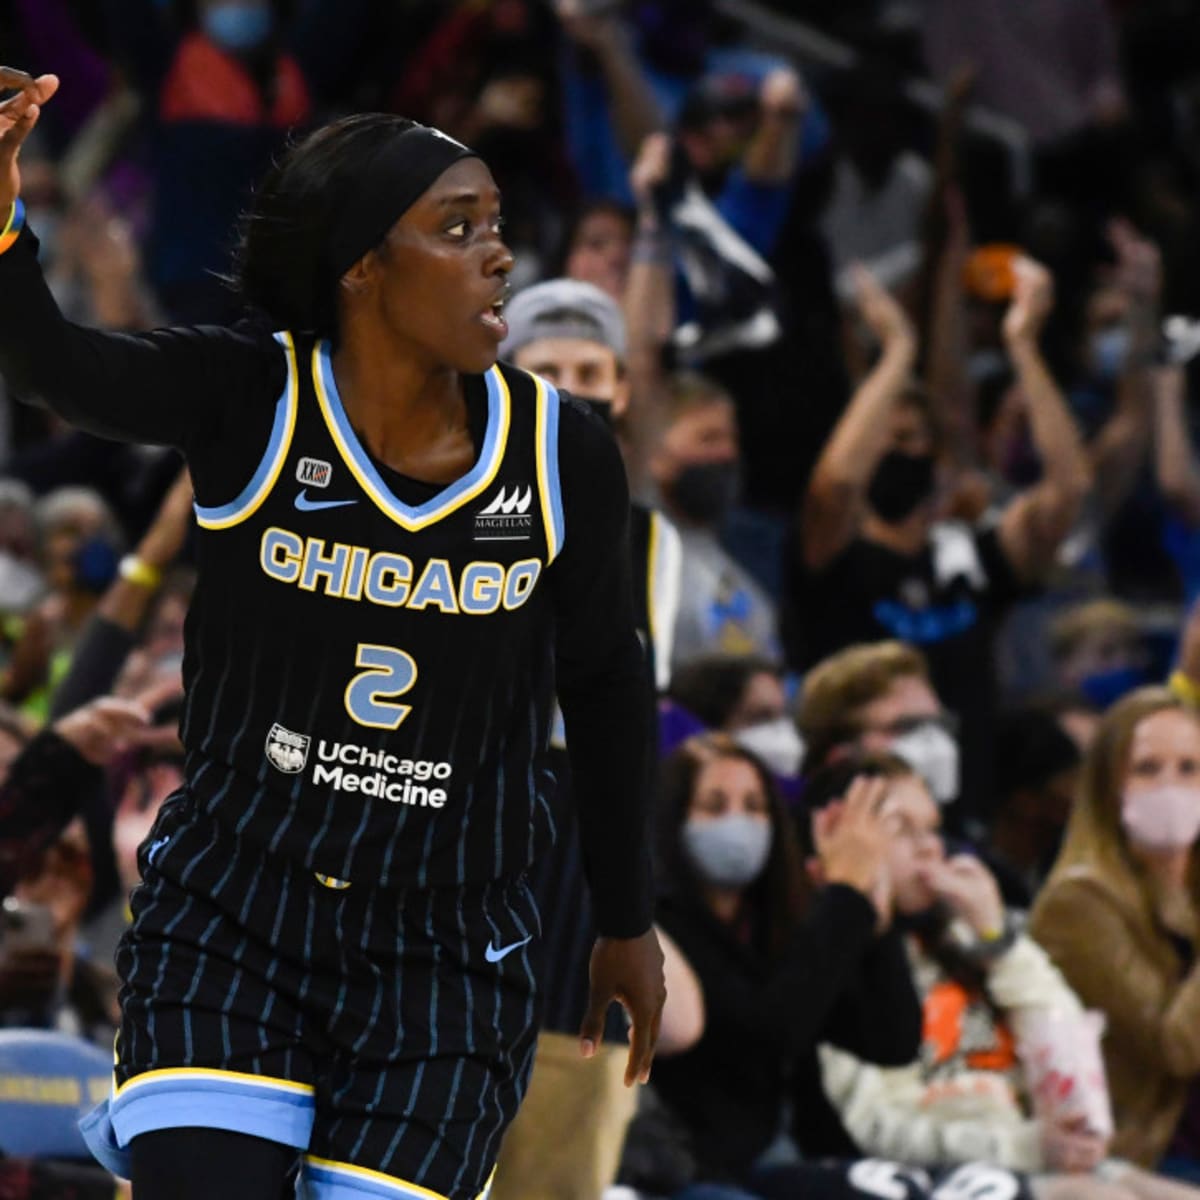 Connecticut Sun vs. New York Liberty: WNBA Playoffs Semifinals Game 1  Betting Trends, Record ATS, Home/Road Splits